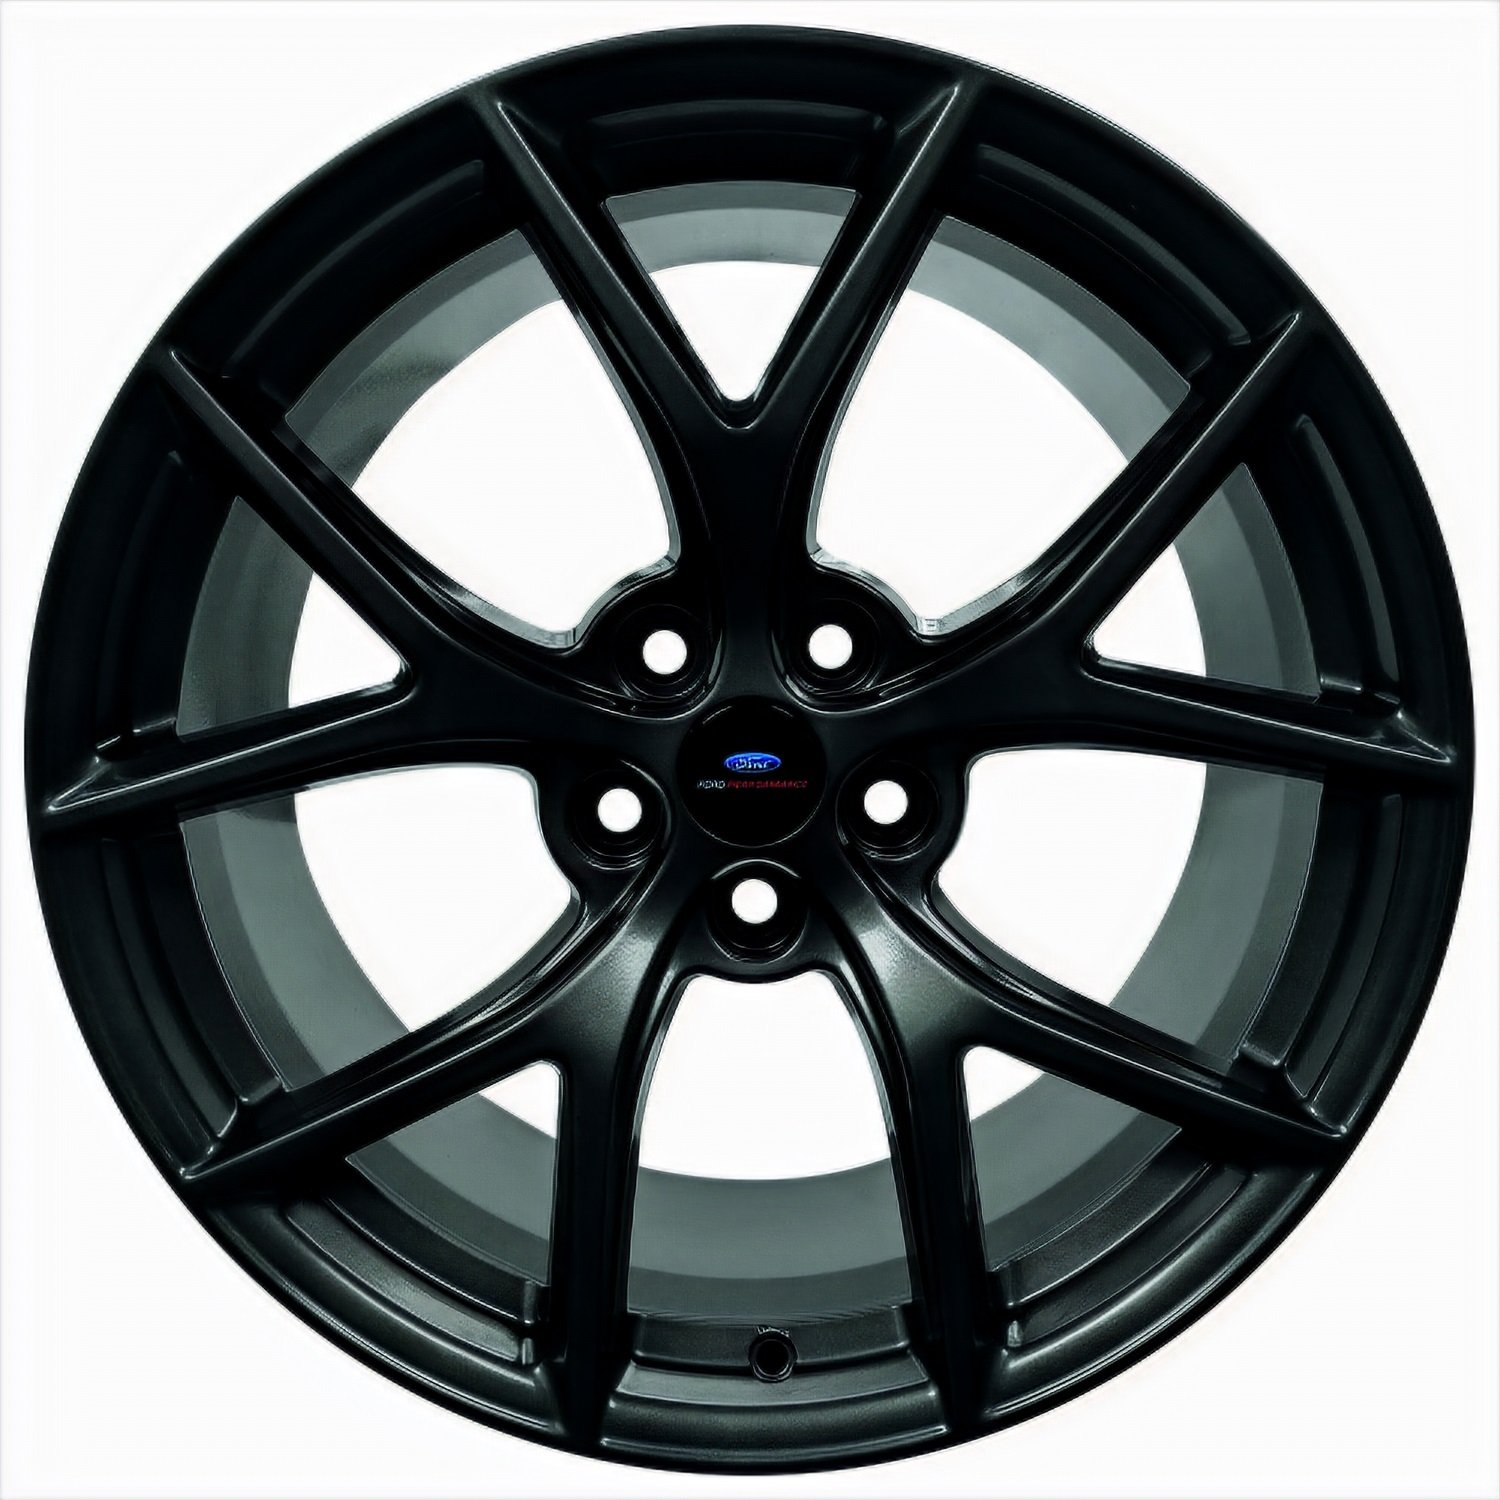 M-1007-DC19105MB HP Performance Pack Front Wheel Fits 6th Gen Ford Mustang Models [19" x 10.5"] Matte Black